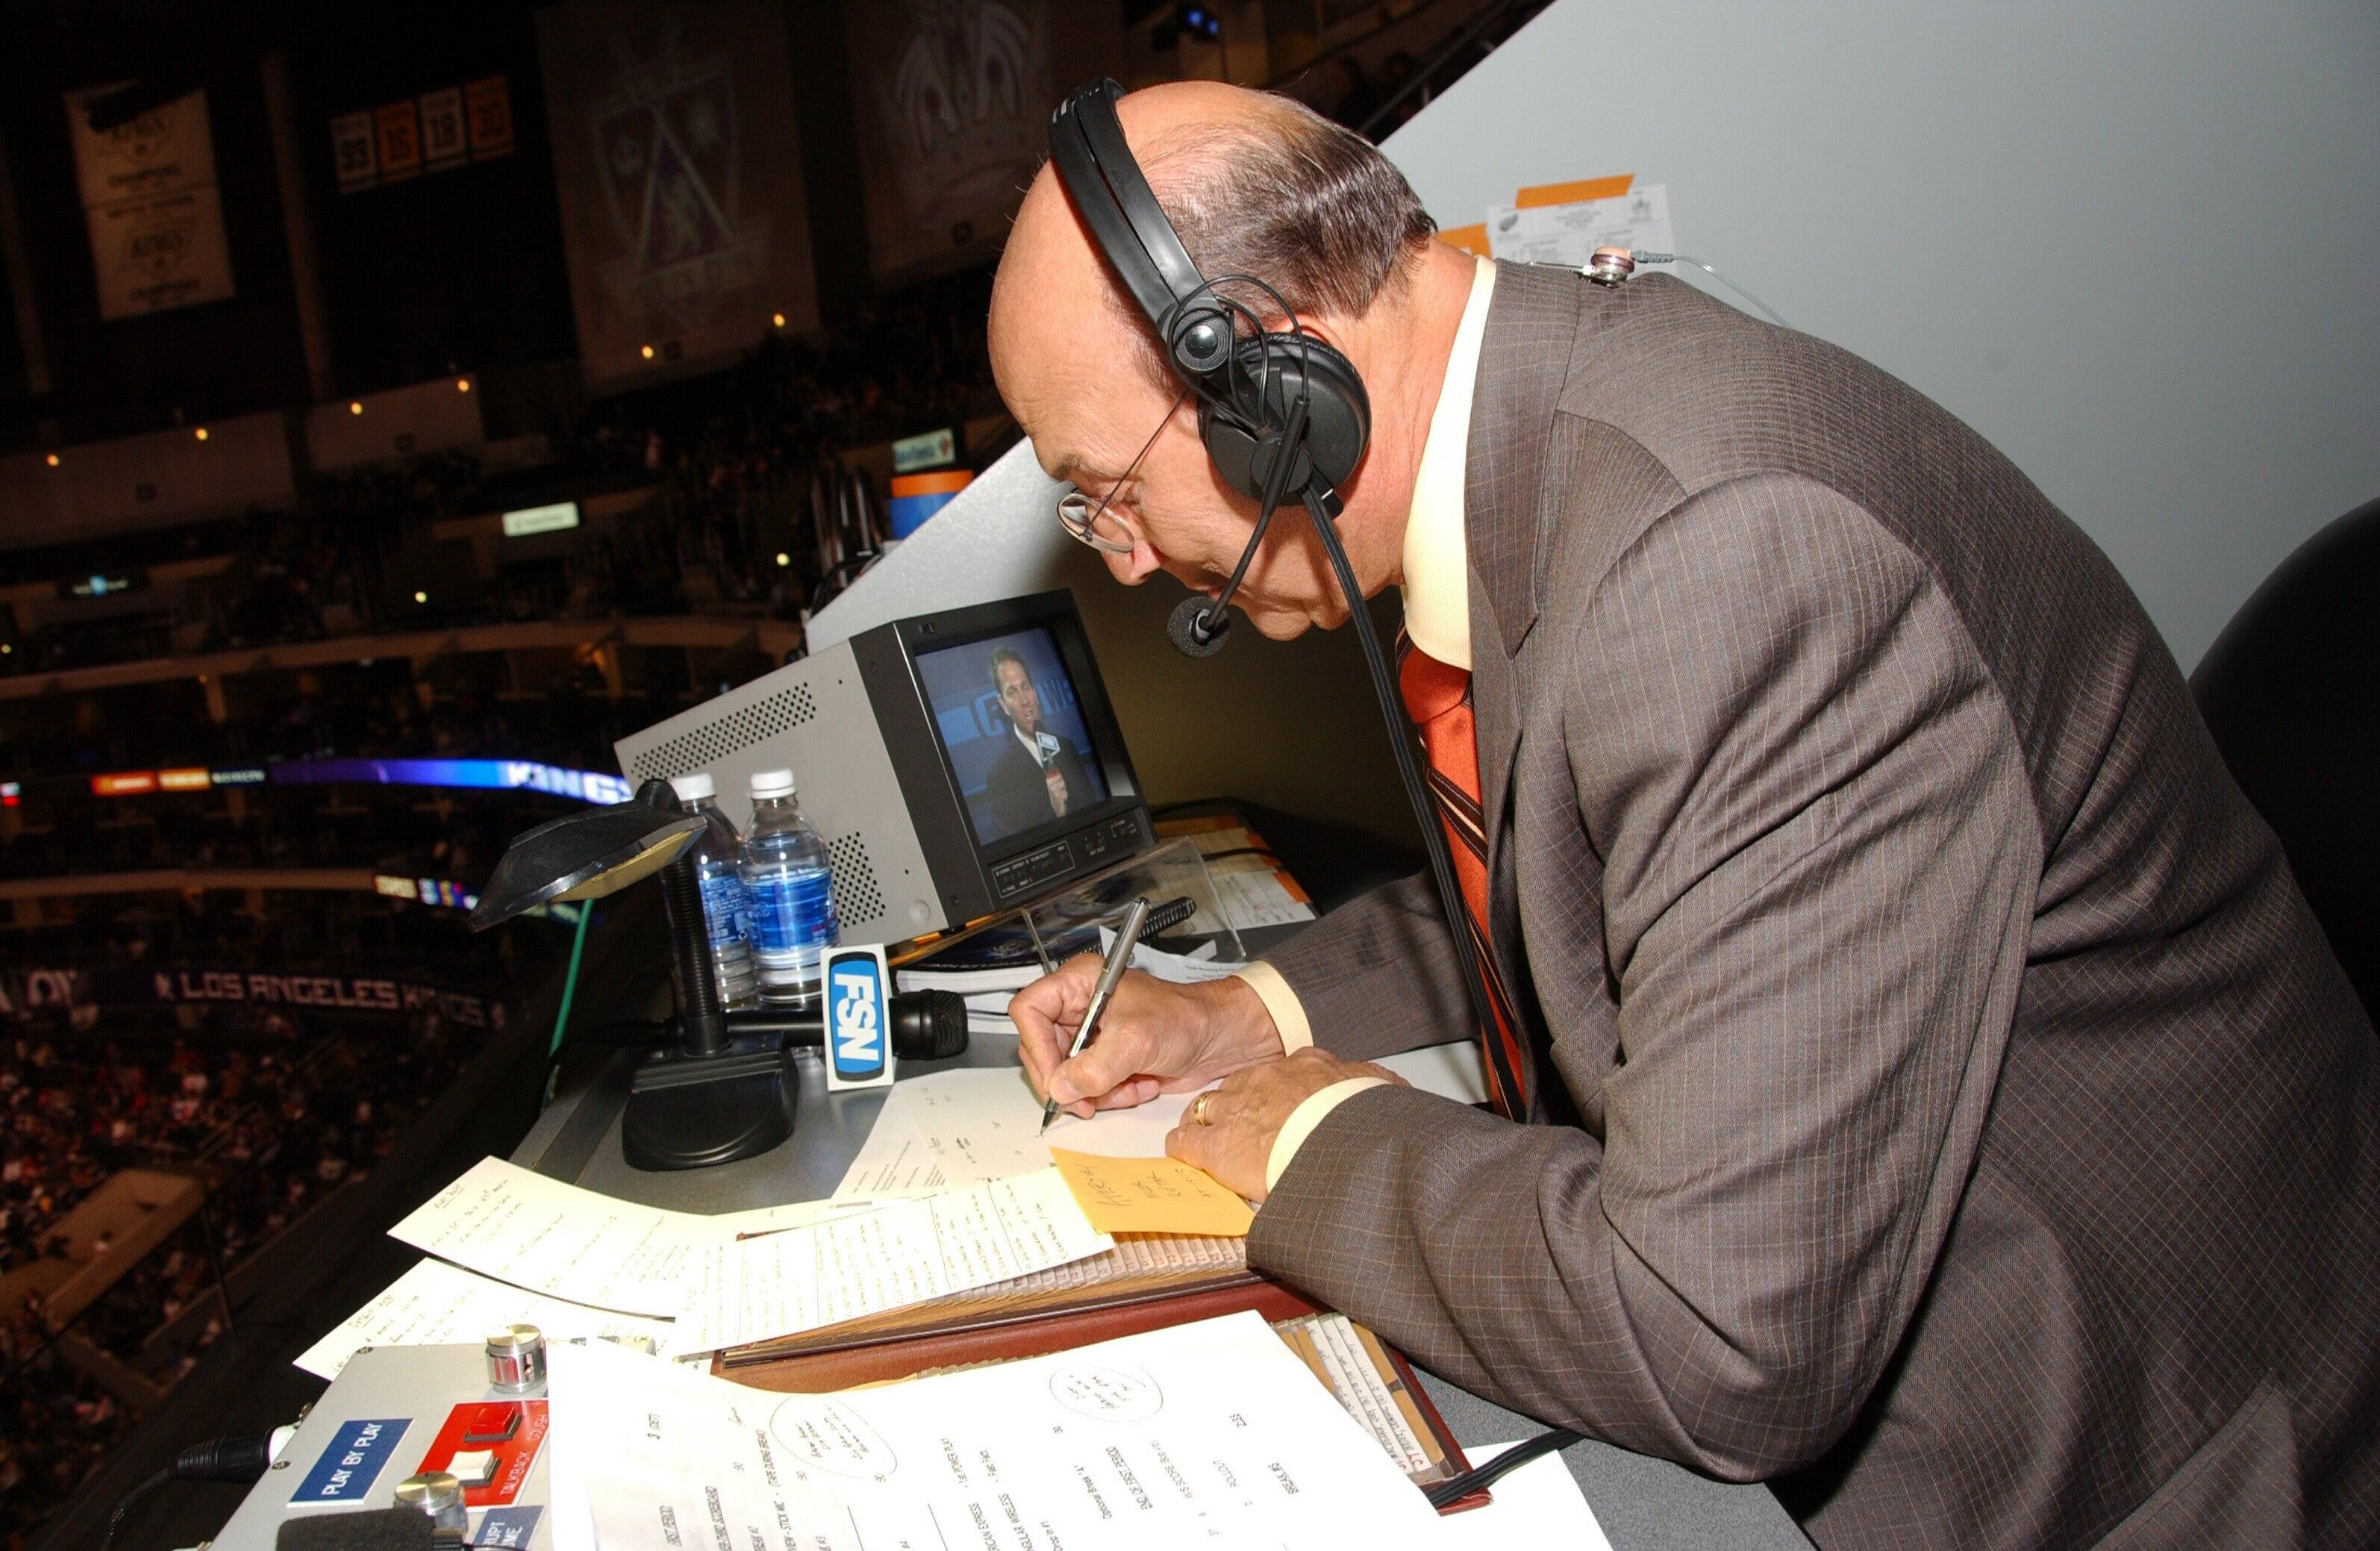 LOS ANGELES - OCTOBER 16:  Los Angeles Kings announcer Bob Miller goes over game notes during the game against the Detroit Red Wings on October 16, 2006 at the Staples Center in Los Angeles, California.  The Red Wings won 3-1.  (Photo by Andrew D. Bernste